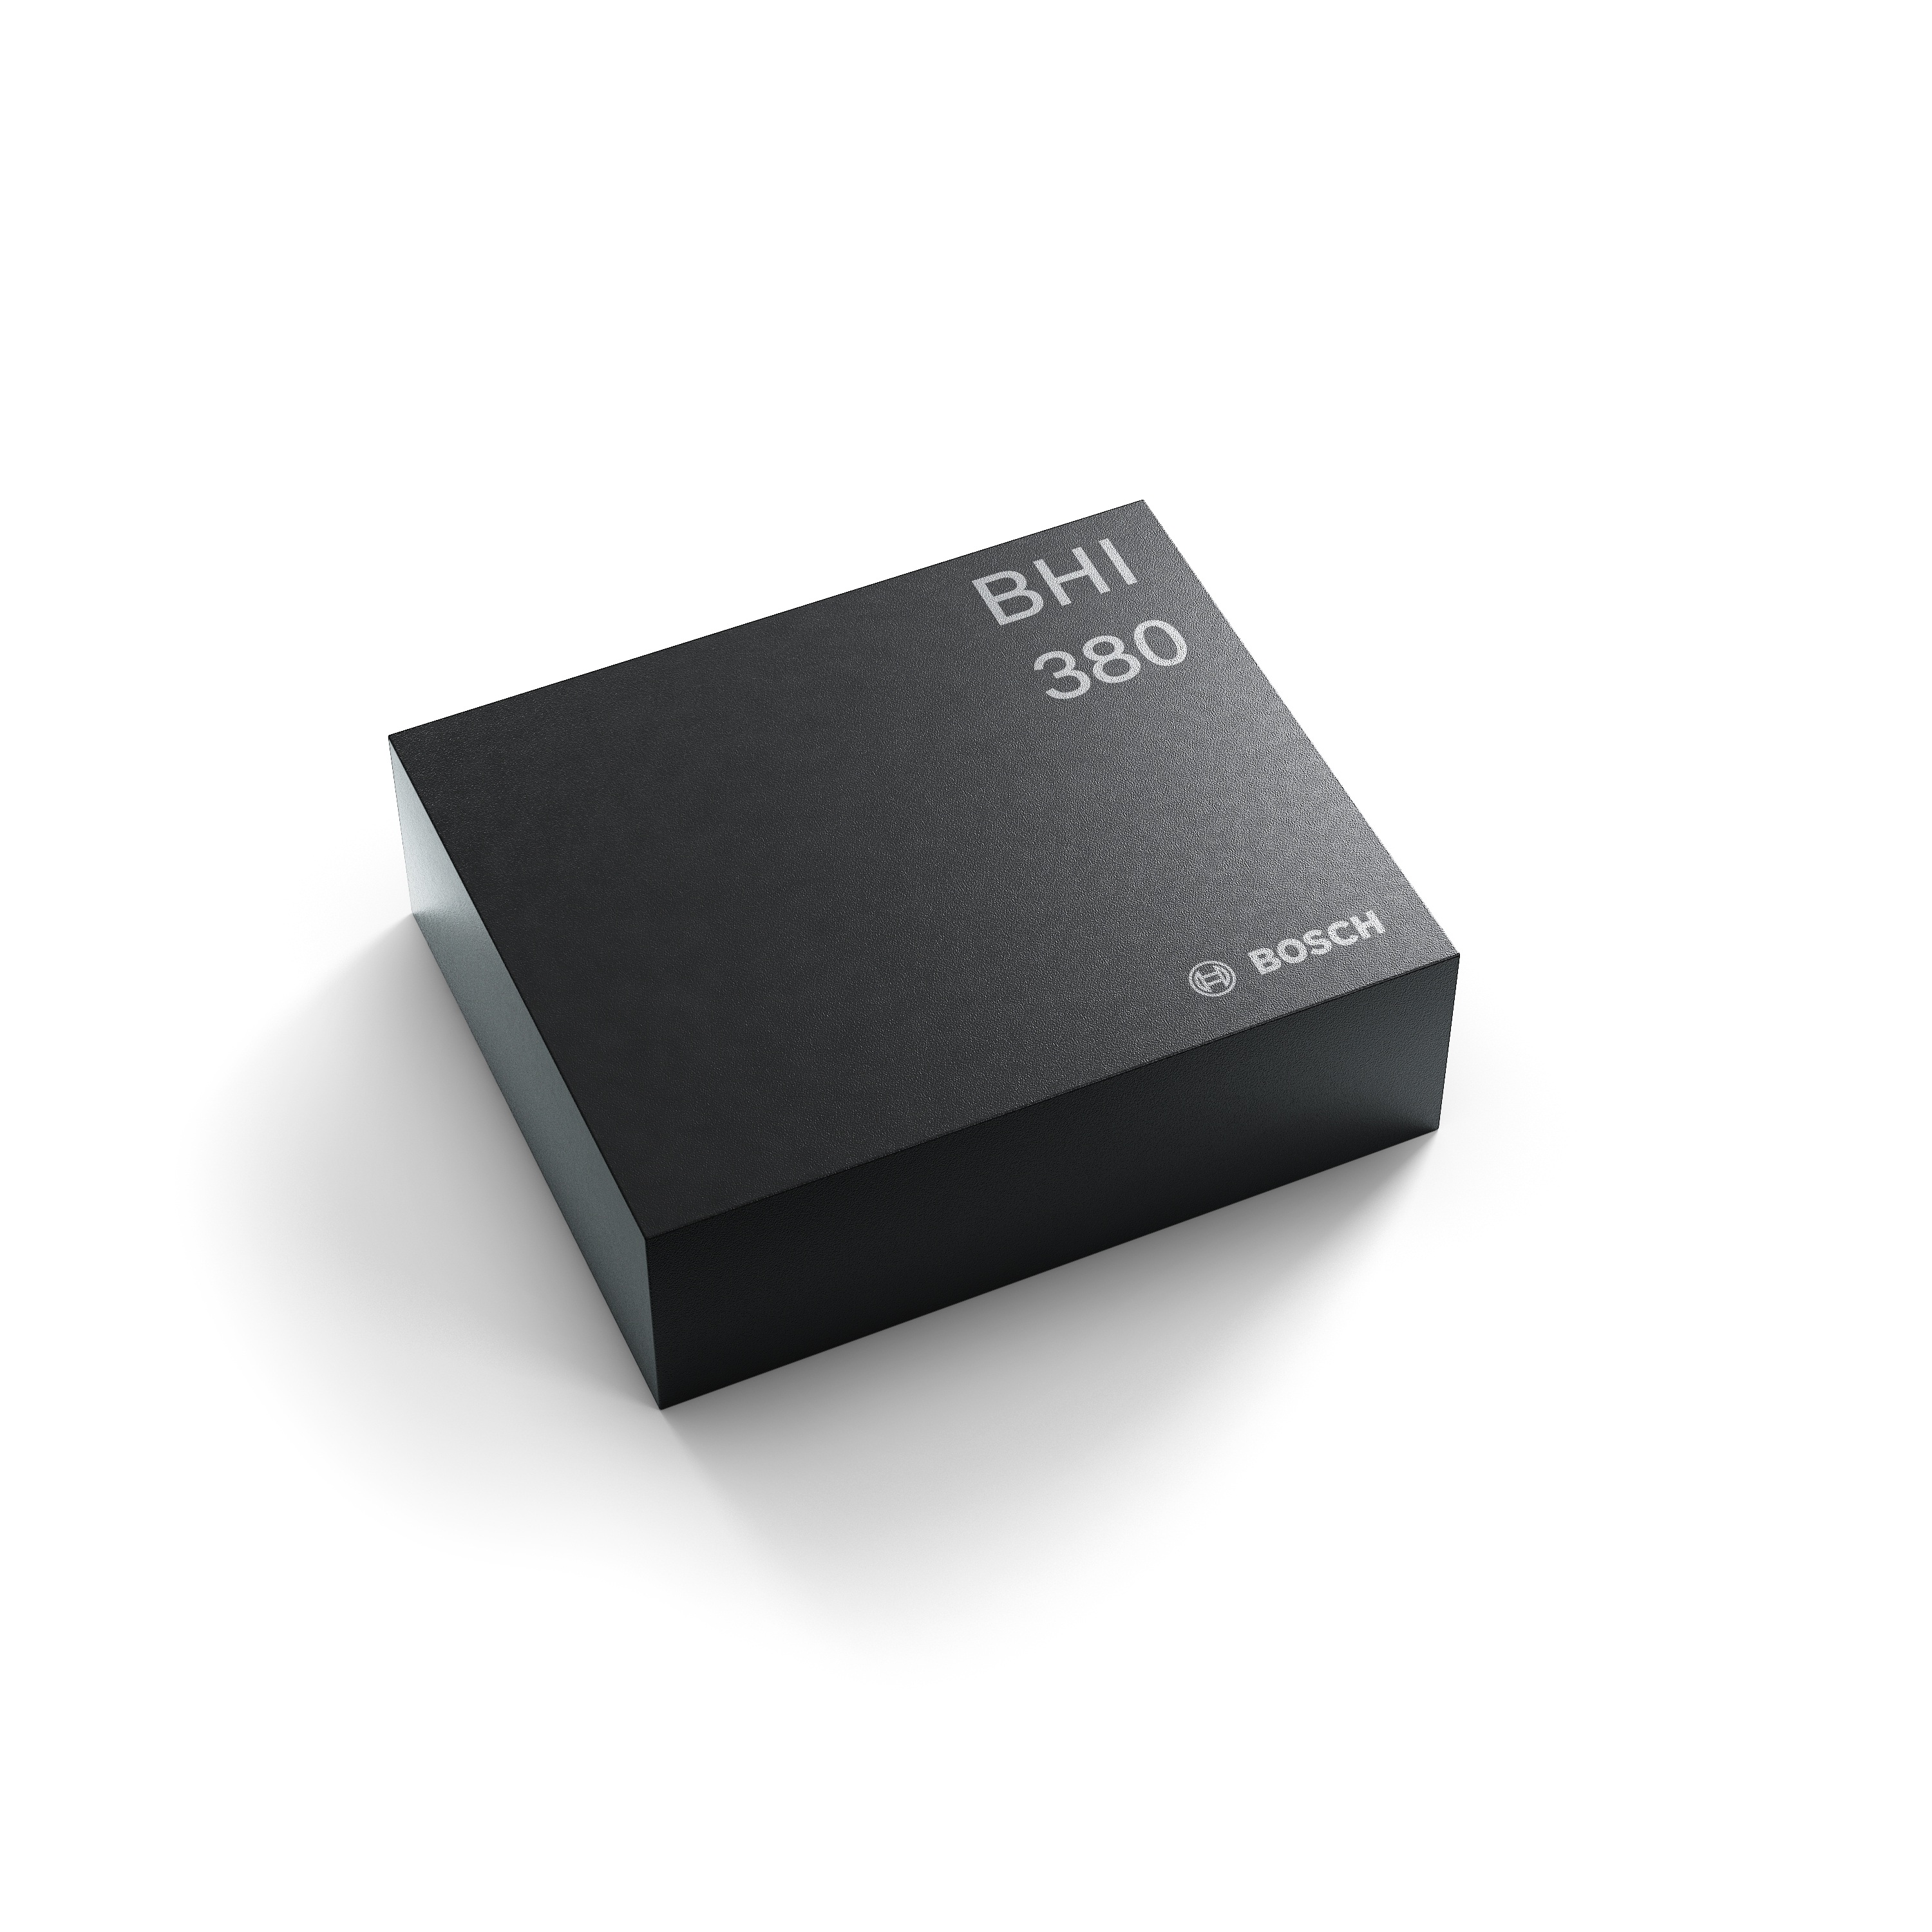 The programmable and AI-enabled BHI380 inertial sensor